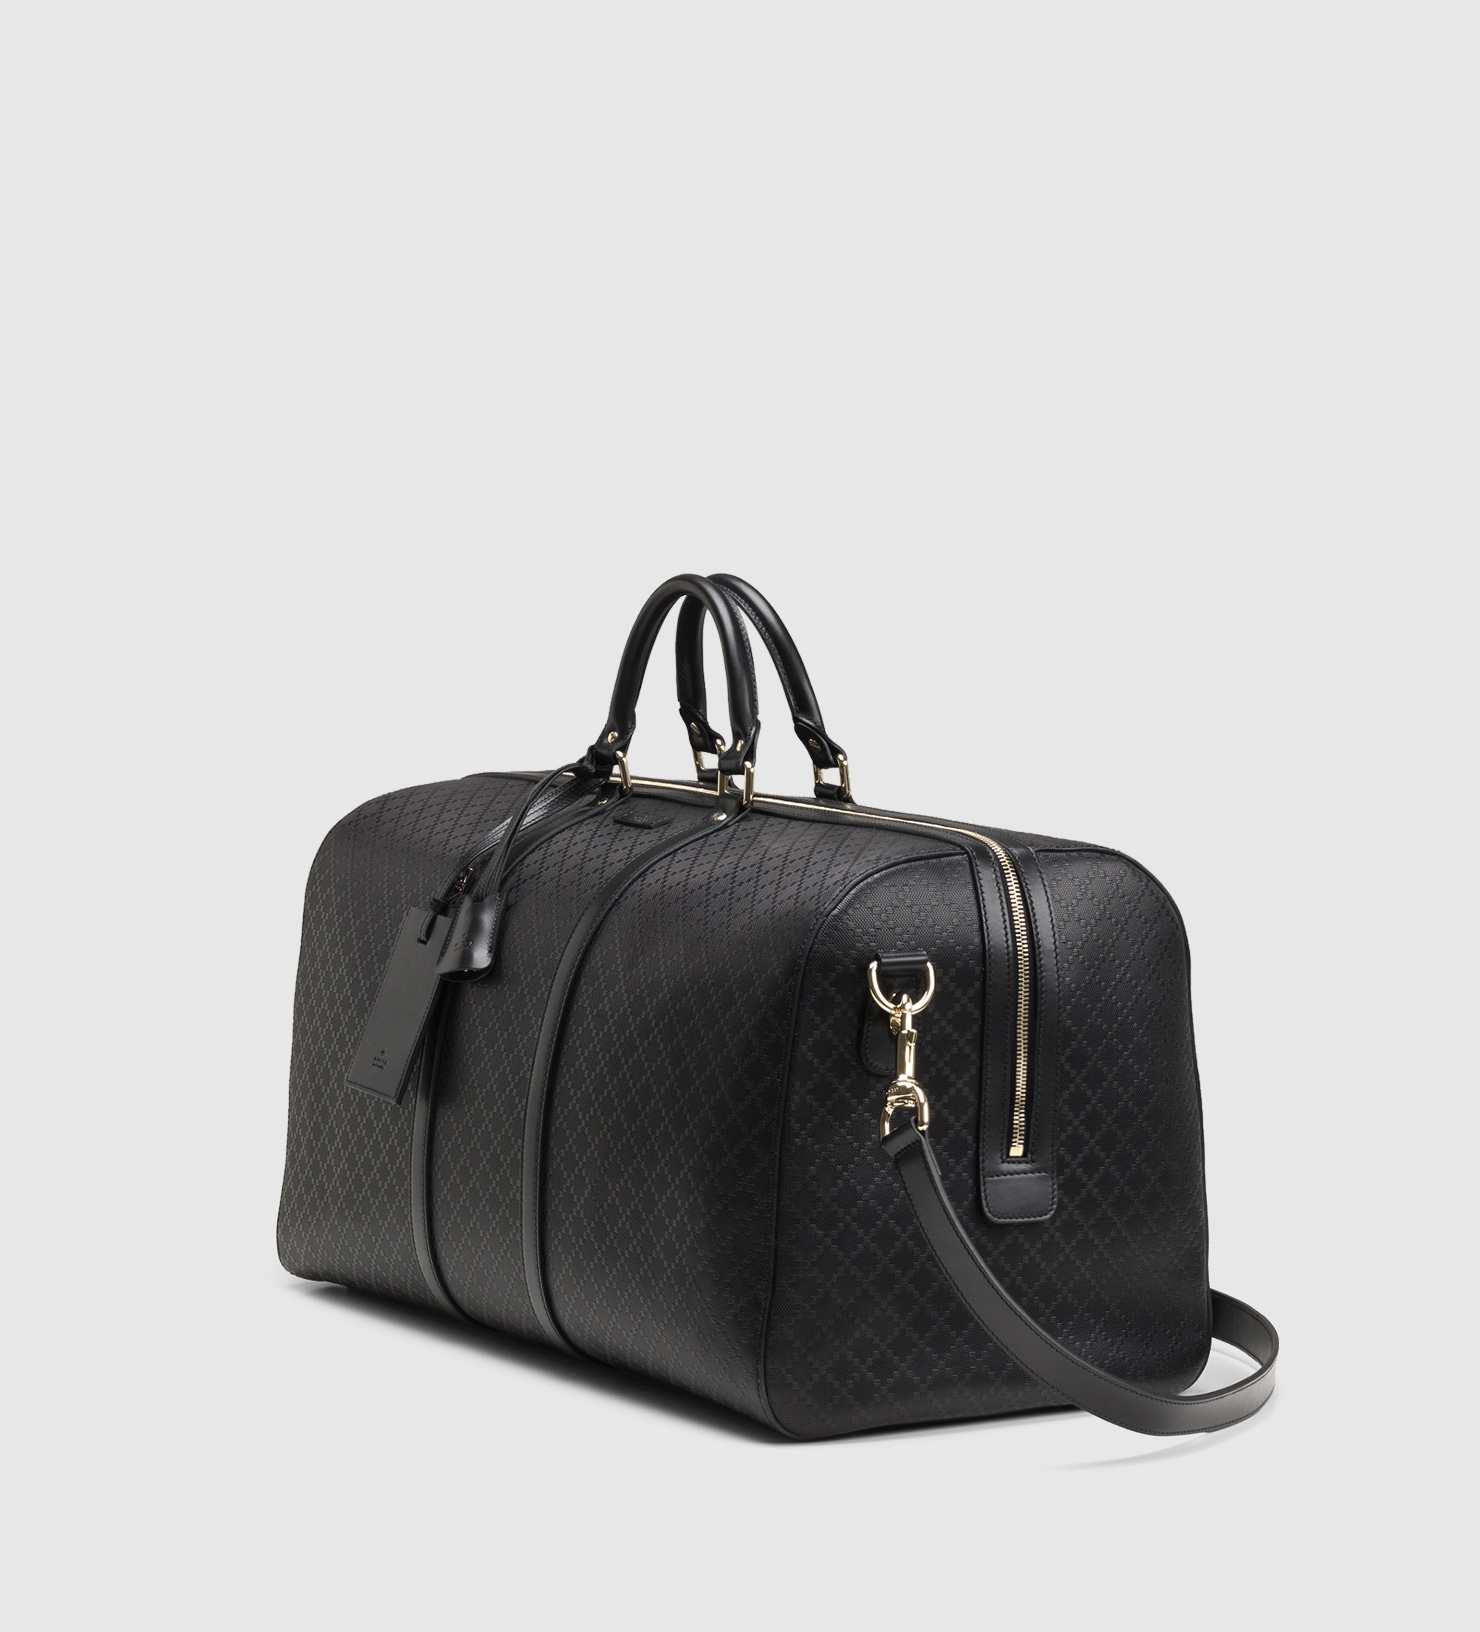 Lyst - Gucci Bright Diamante Leather Carry-on Duffle Bag in Black for Men